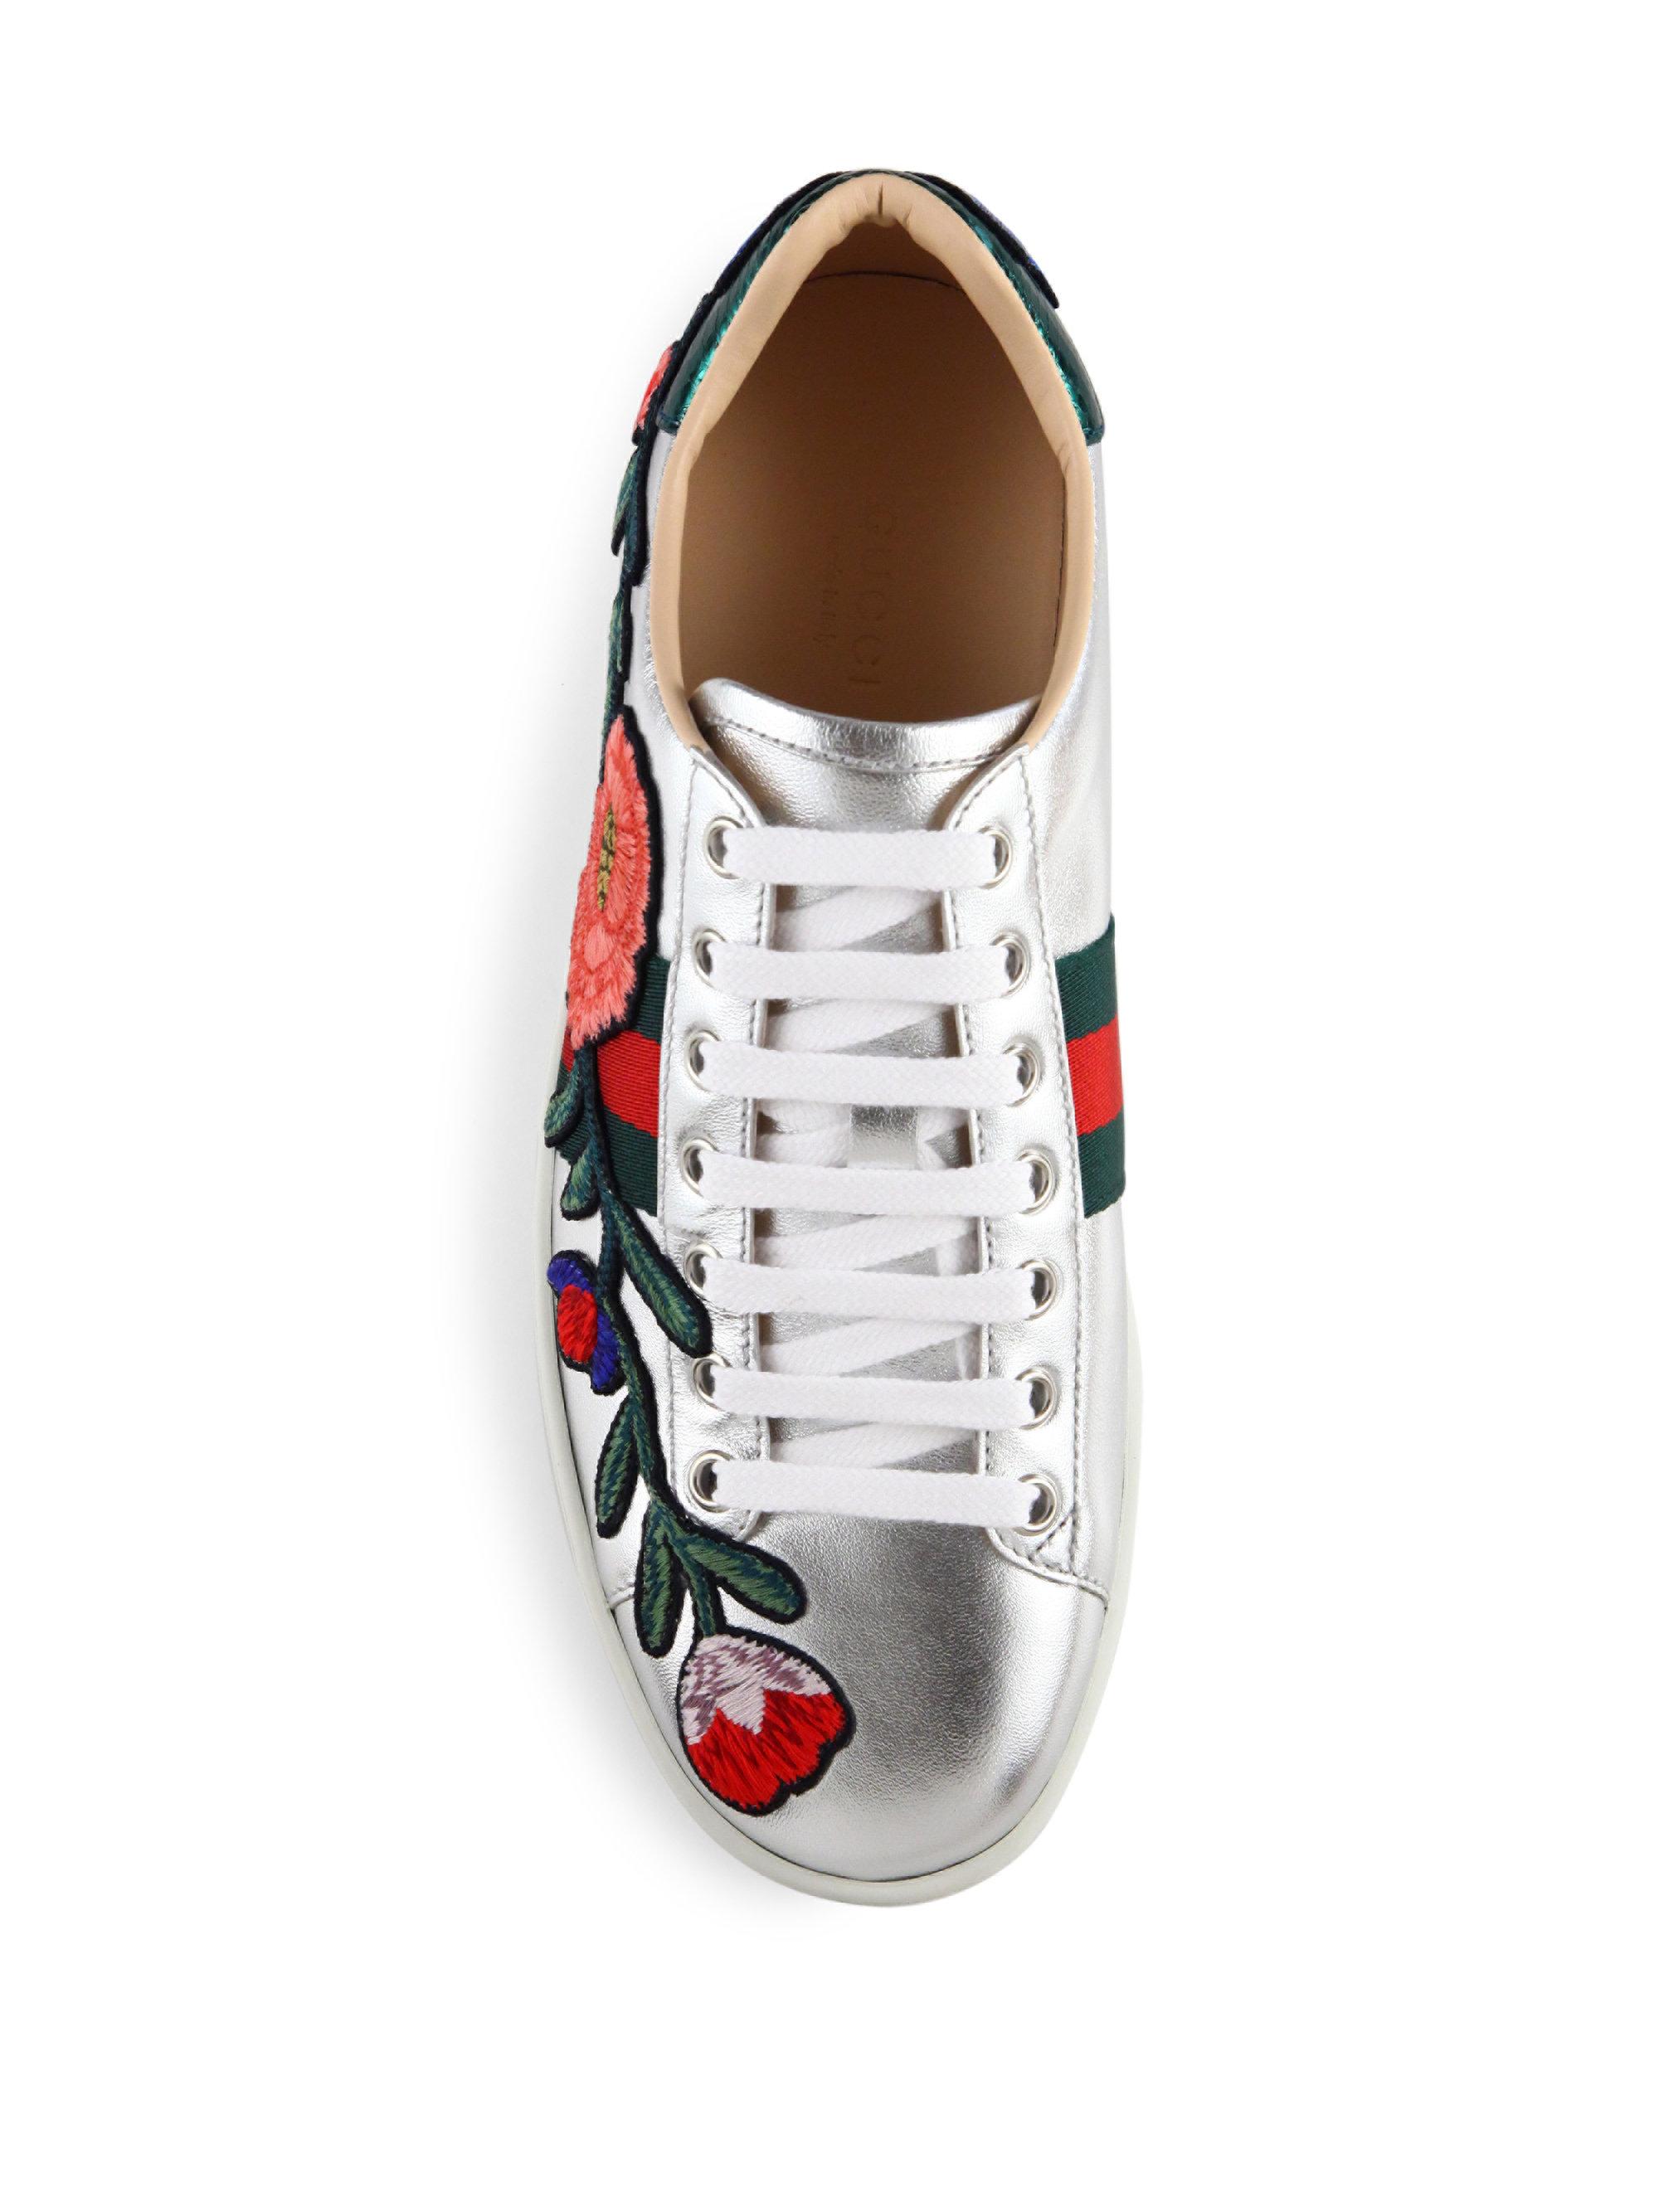 Gucci New Ace Floral-embroidered Metallic Leather Sneakers - Lyst